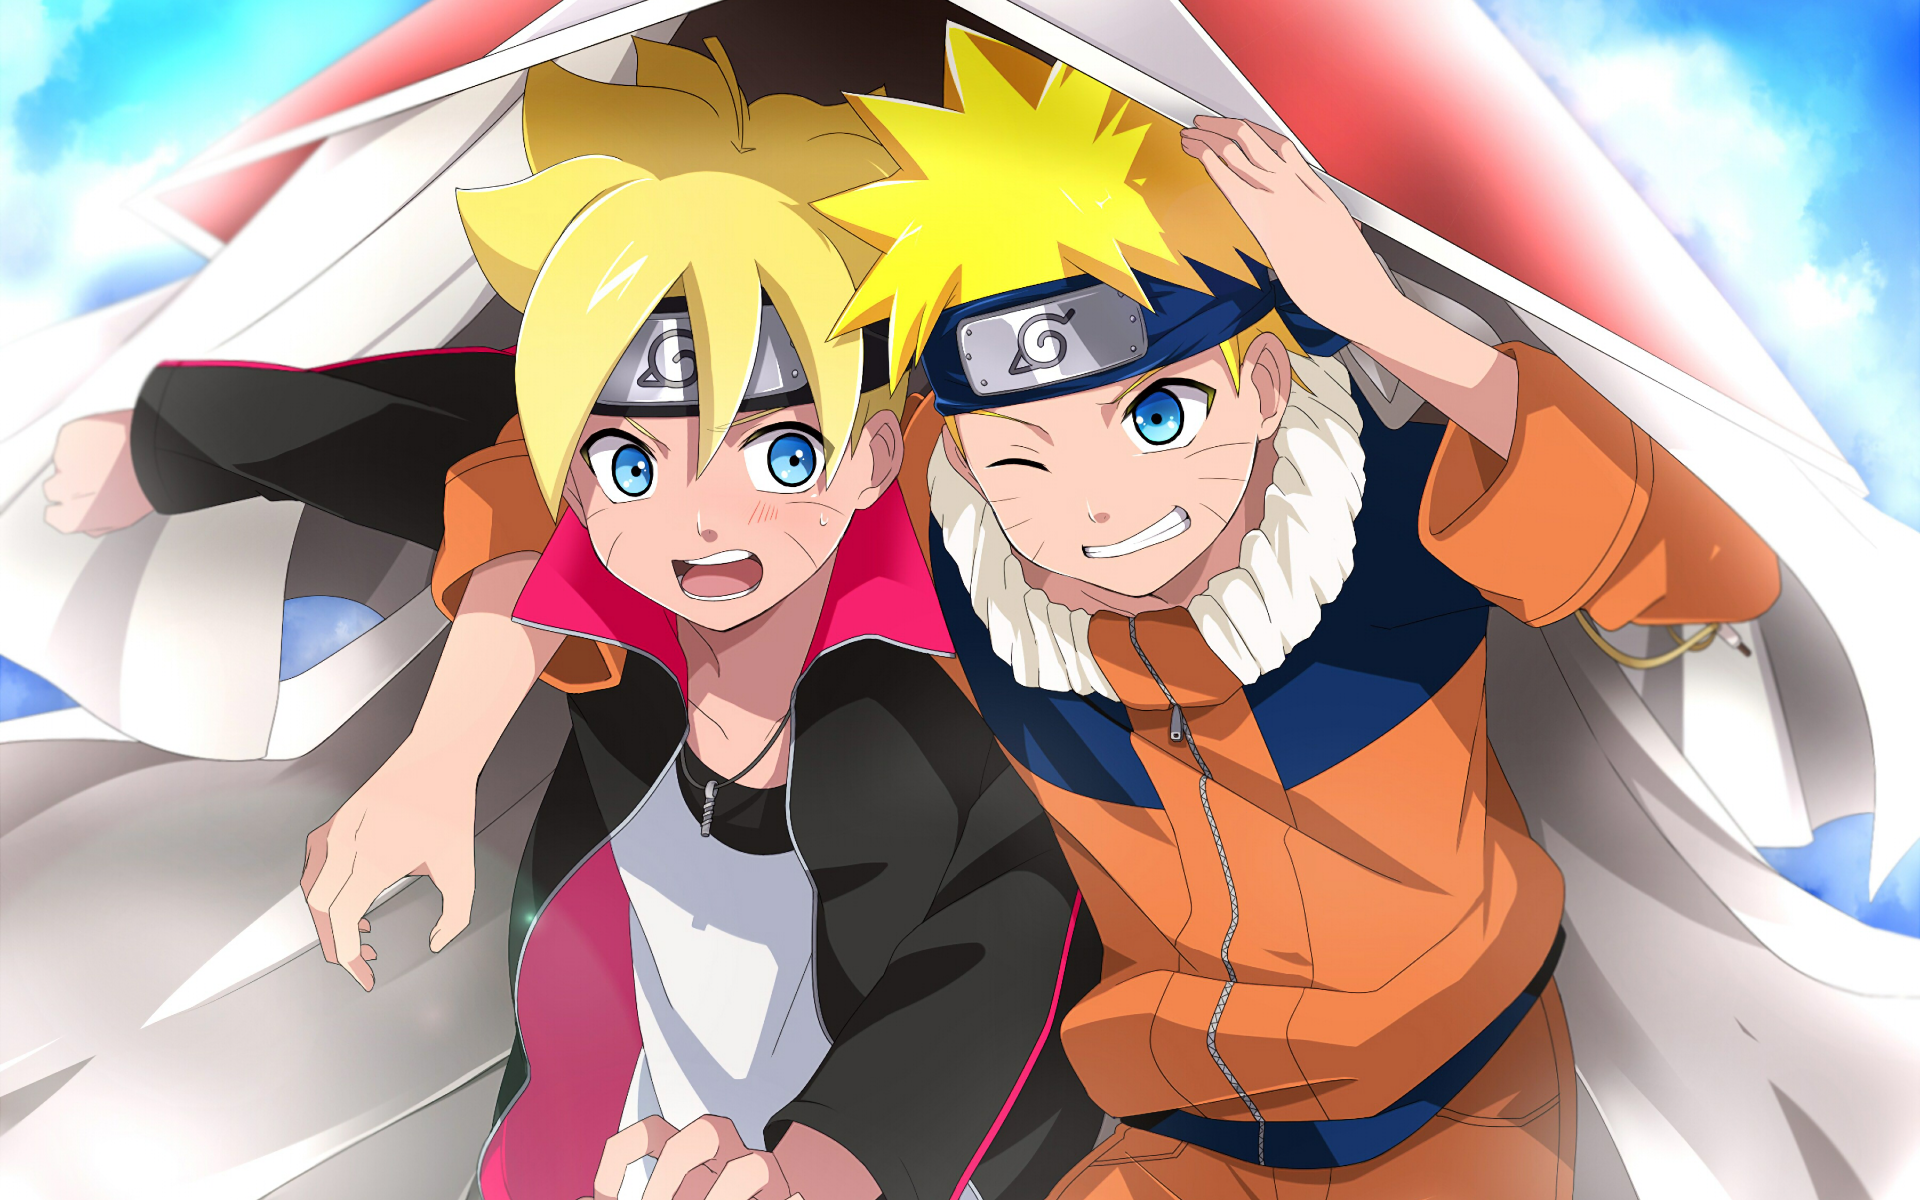 Naruto and Boruto by 蒼羽りこ